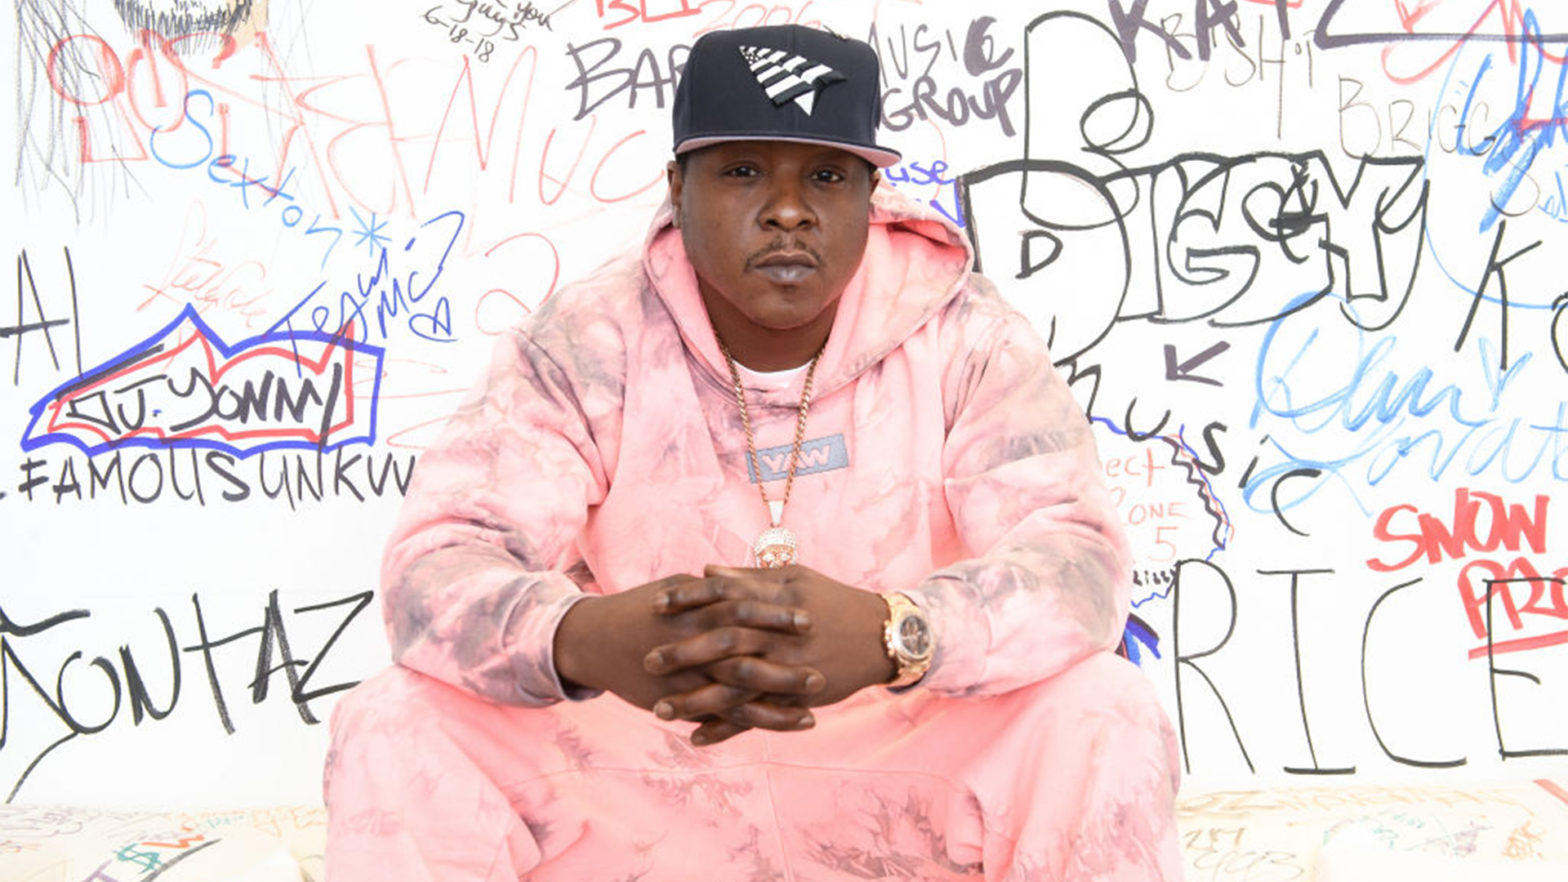 Jadakiss Thanks Diddy For Not Playing Hardball After The LOX Was Bought Out Of Their Contract For $2M